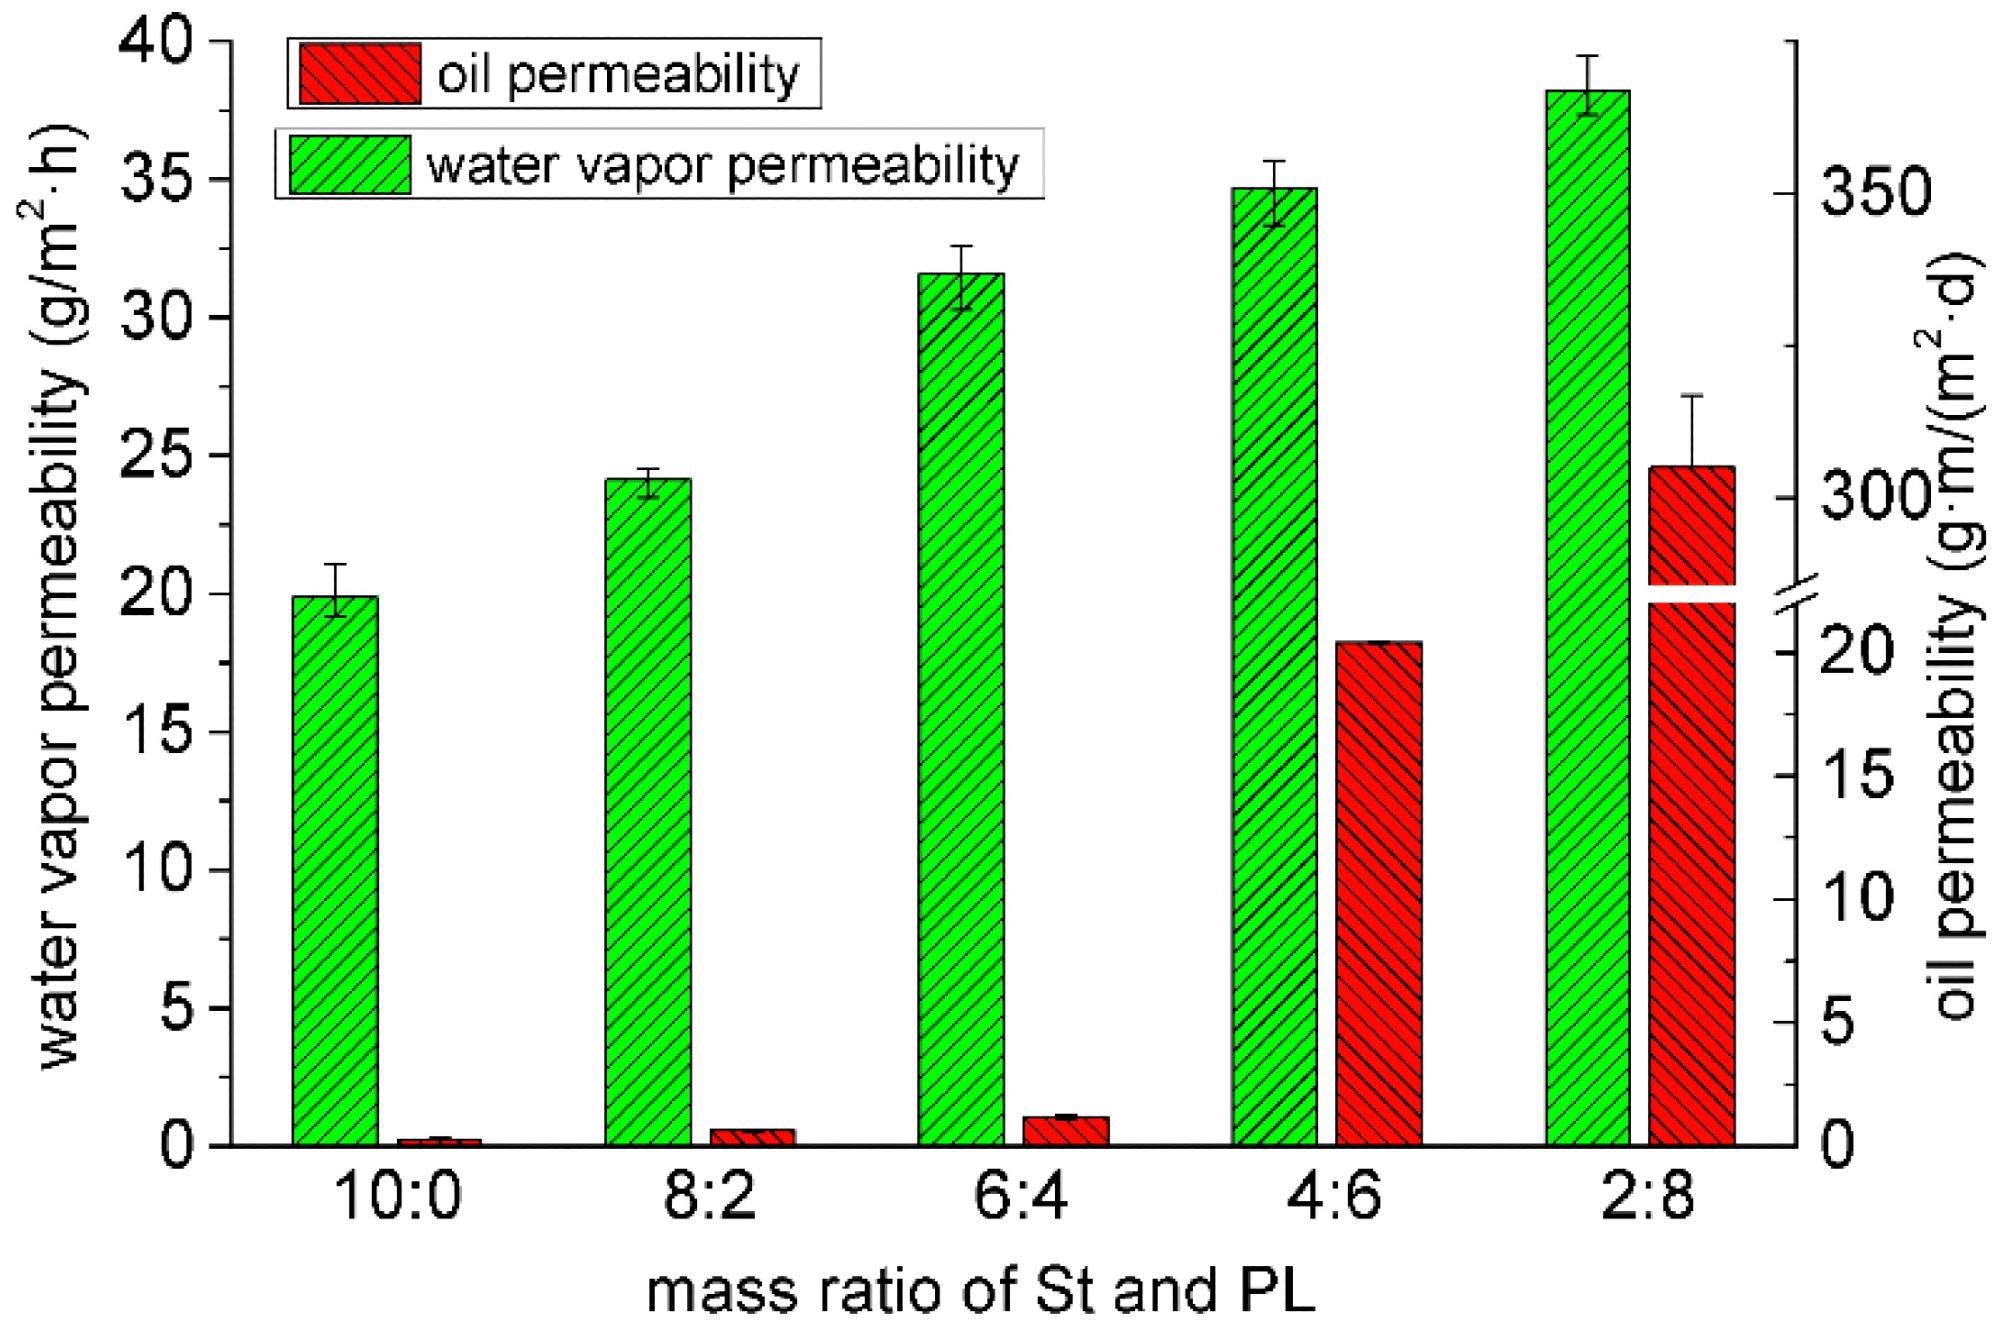 Water vapor permeability and oil permeability of the composite films with St/PL mass ratios.